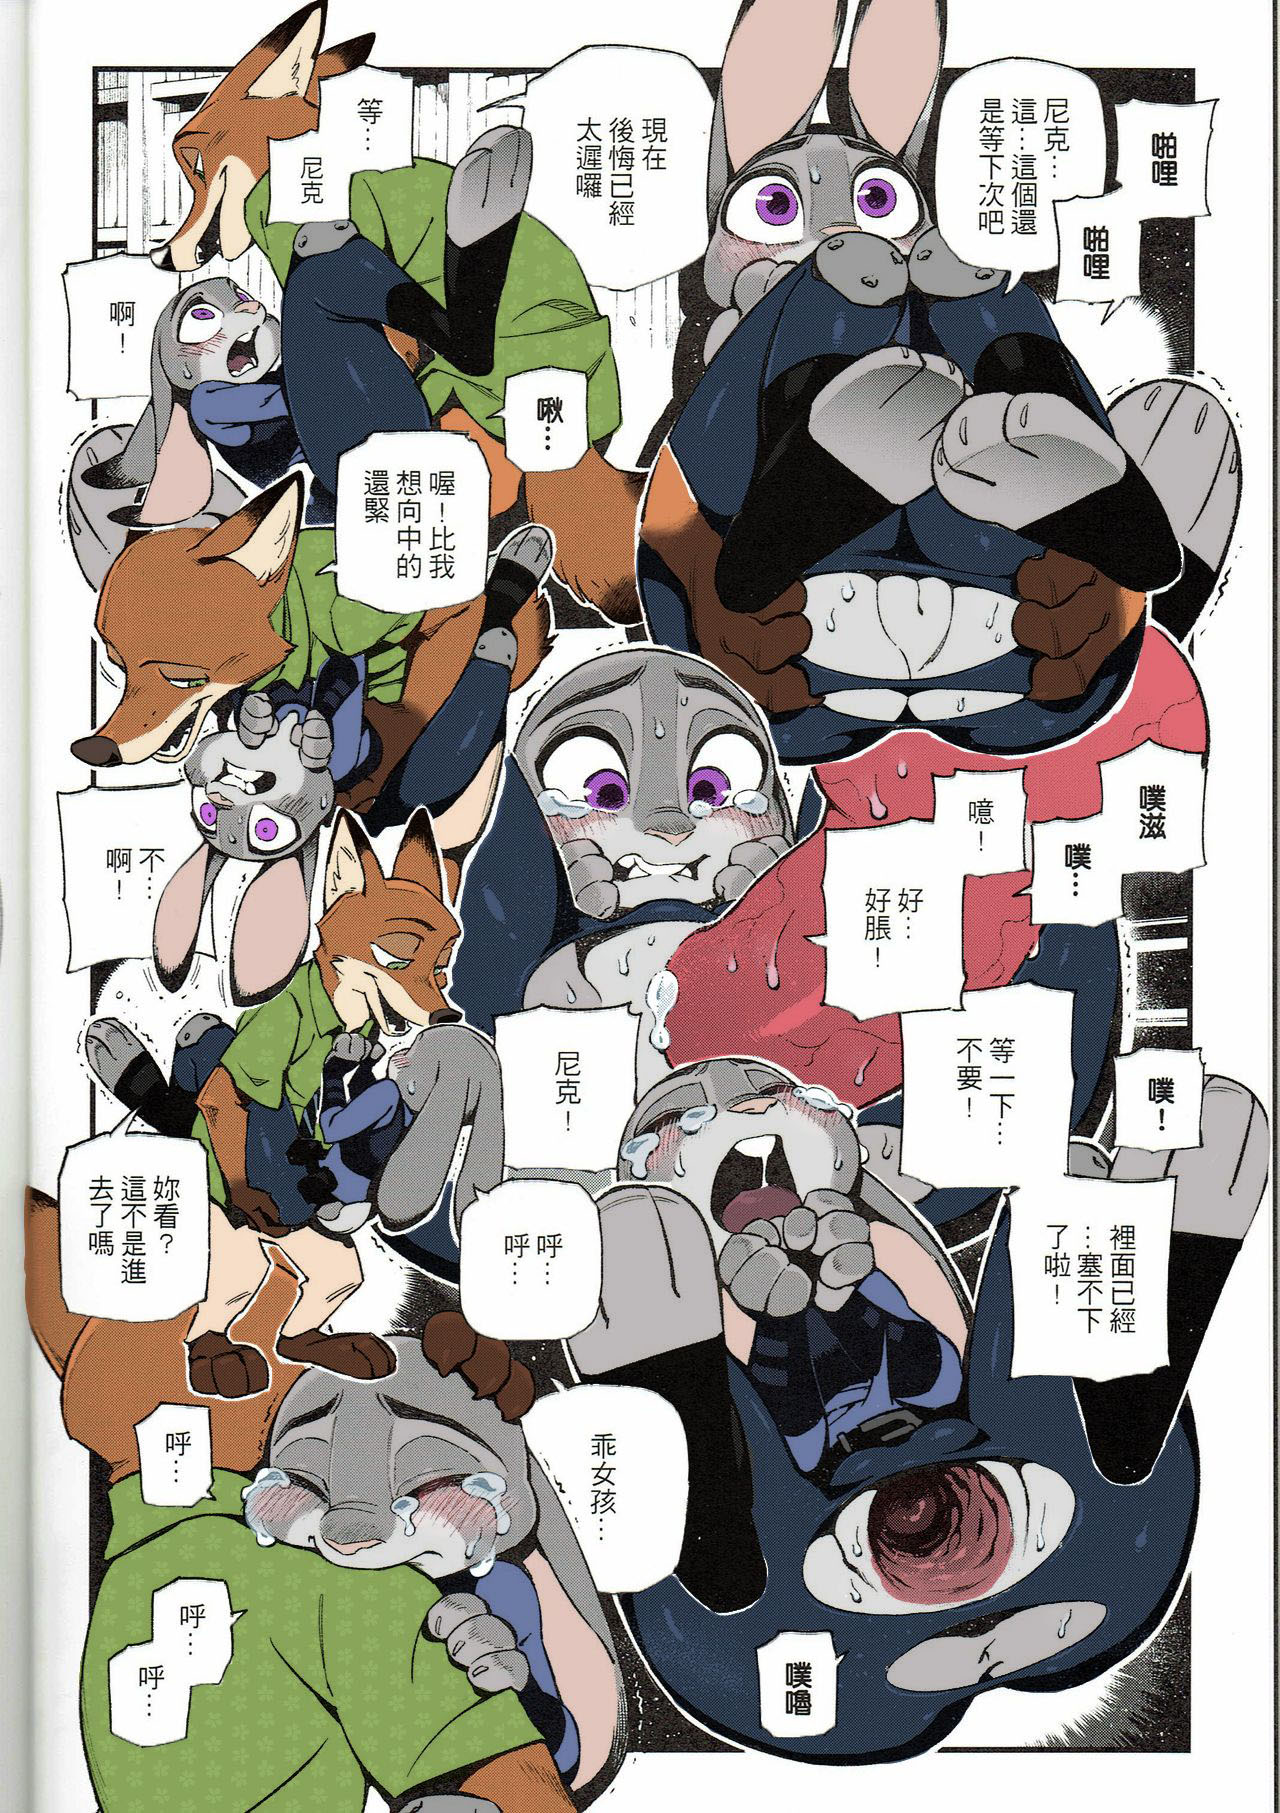 [Bear Hand] What Does The Fox Say? (Zootopia) [Chinese] [Colored] (FF28) [熊掌社 (俺正讀)] 狐狸怎麼叫? (ズートピア) [中国語] [カラー化]